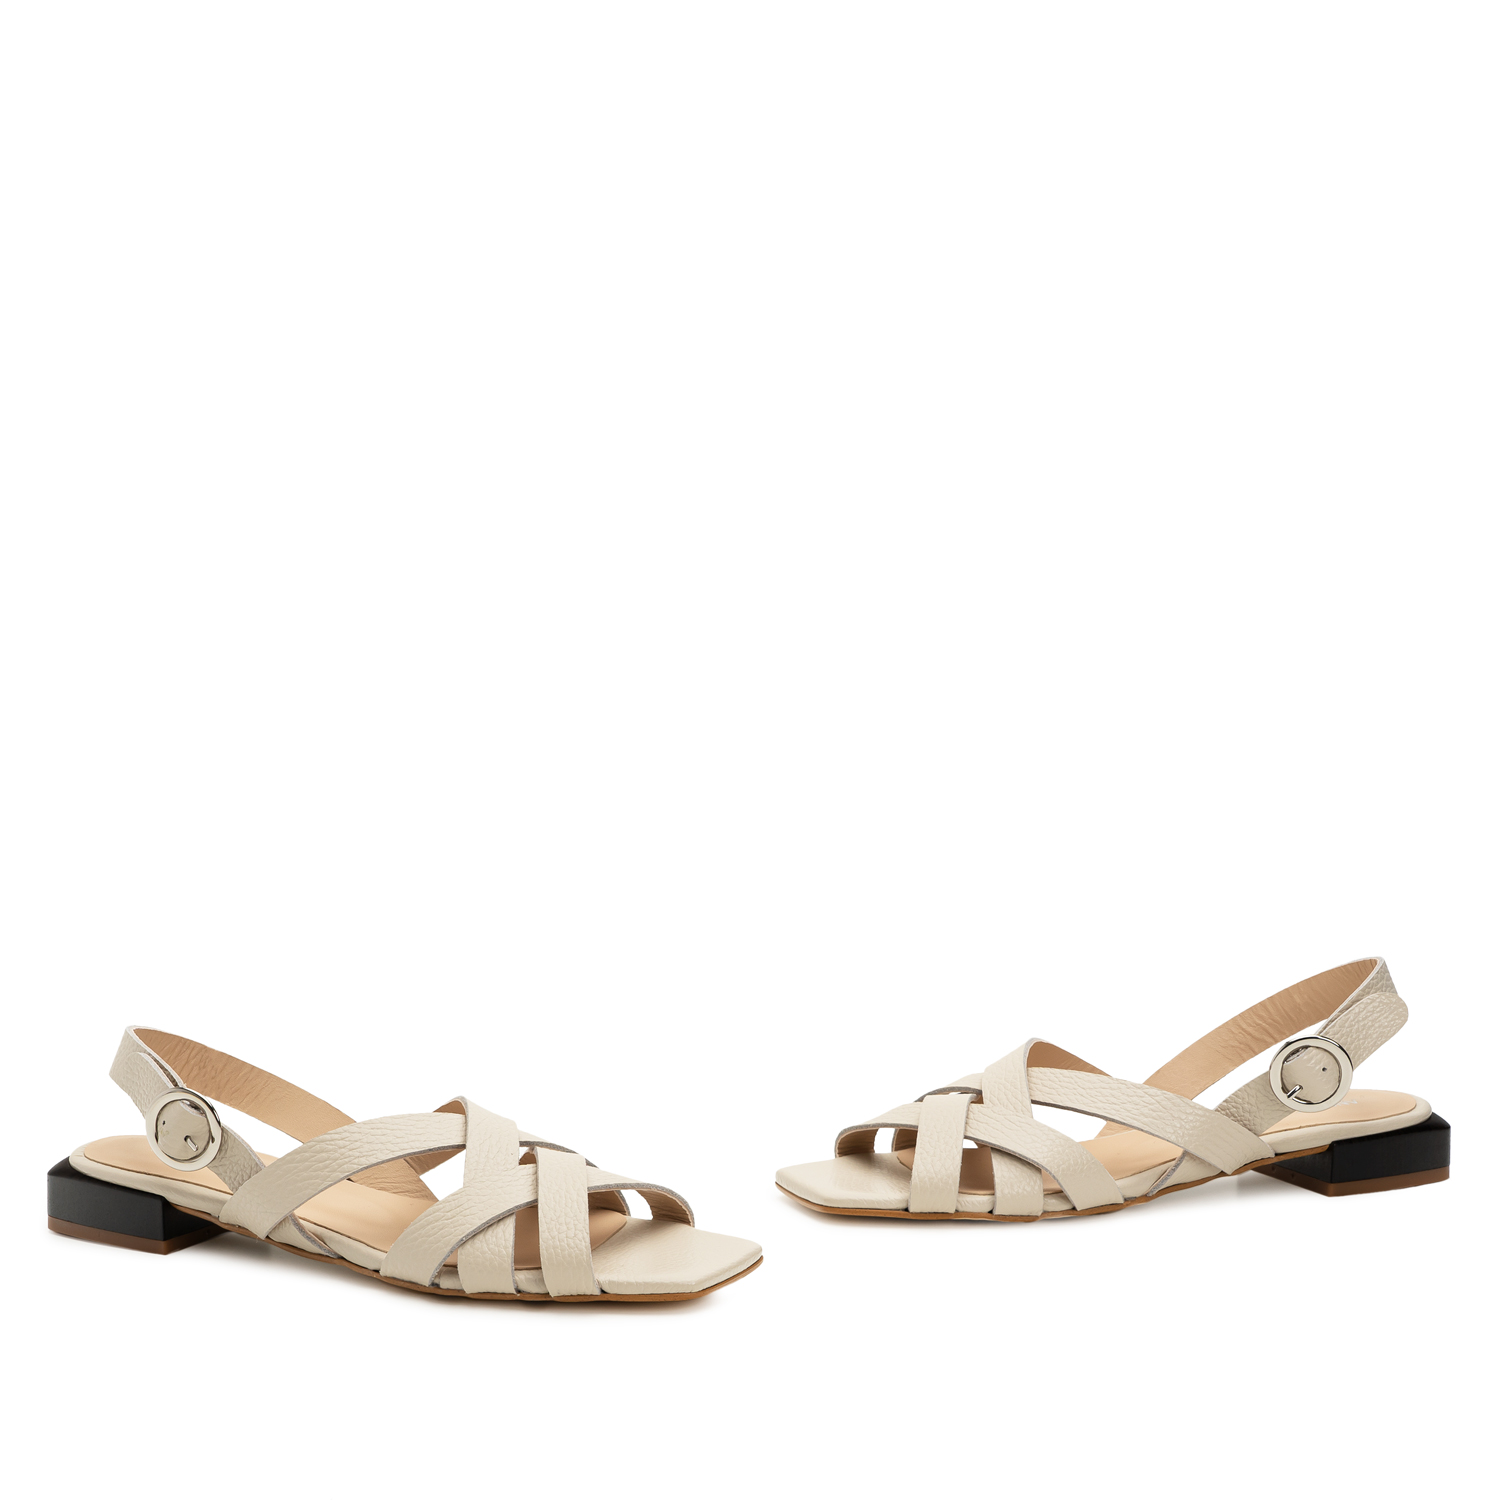 Sandals in Beige Embossed Leather 